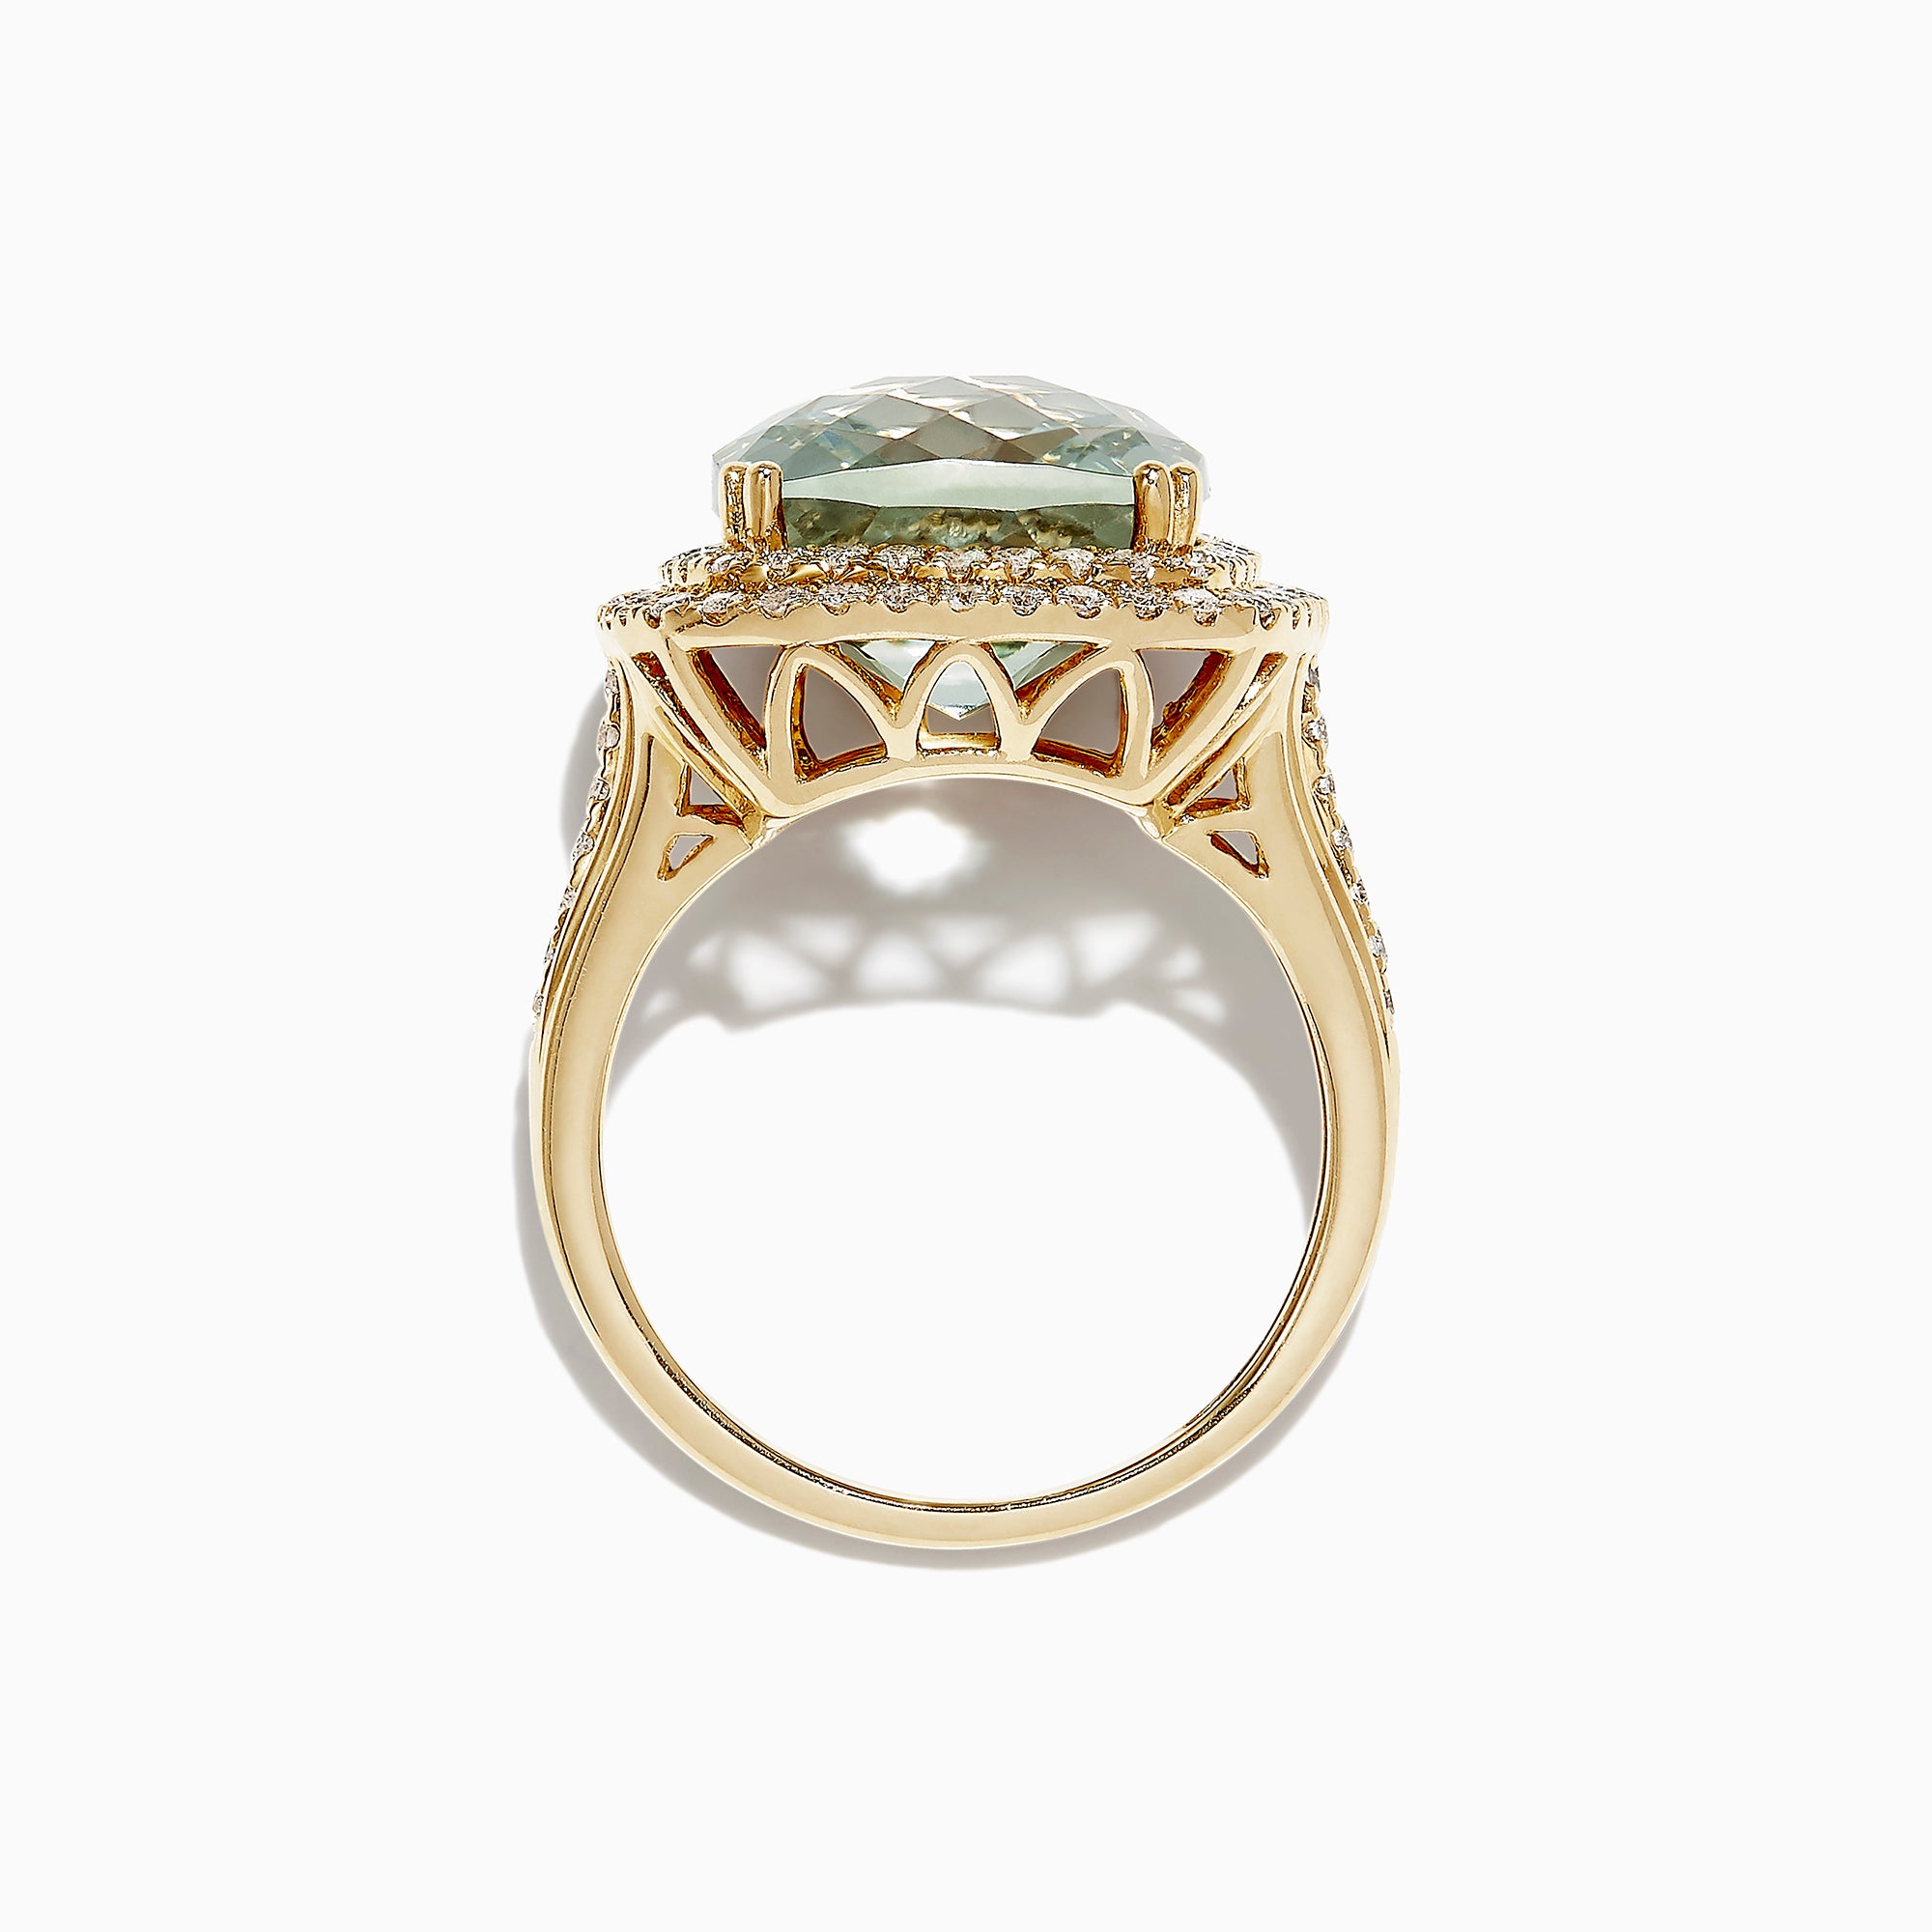 Effy 14K Yellow Gold Green Amethyst and Diamond Cocktail Ring, 11.22 TCW